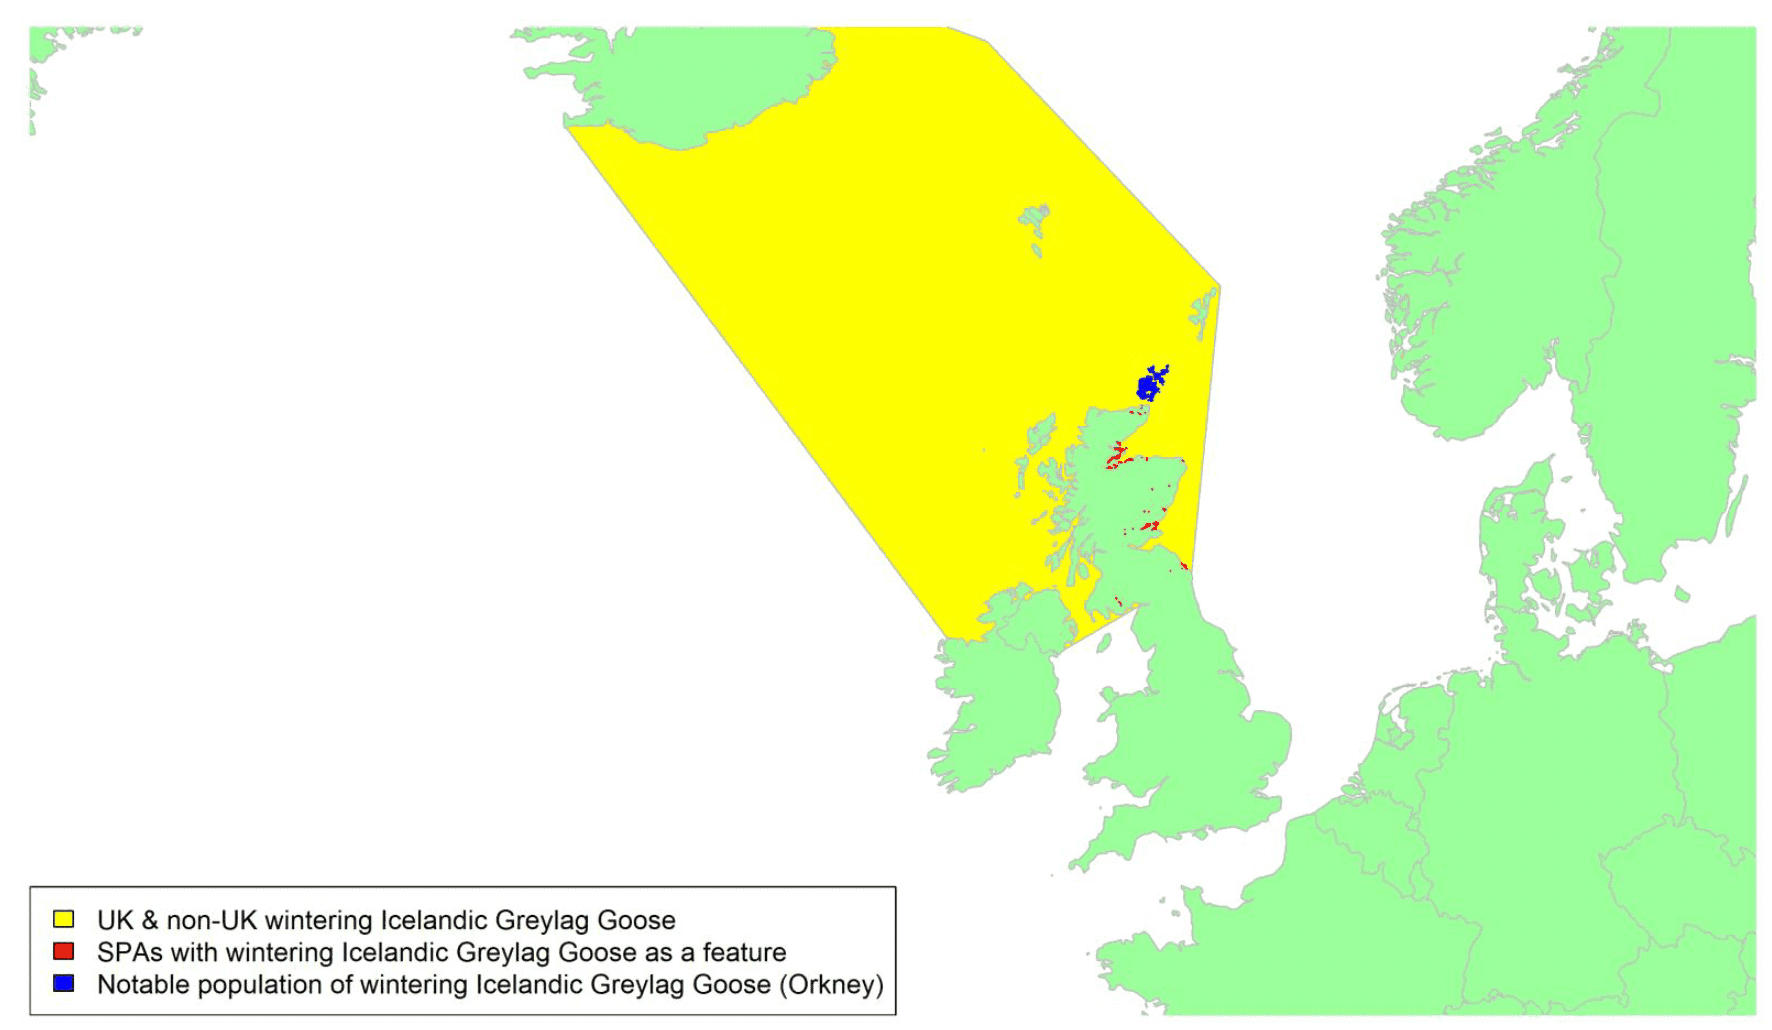 Map of North West Europe showing migratory routes and SPAs within the UK for ‘Icelandic’ Greylag Goose as described in the text below.